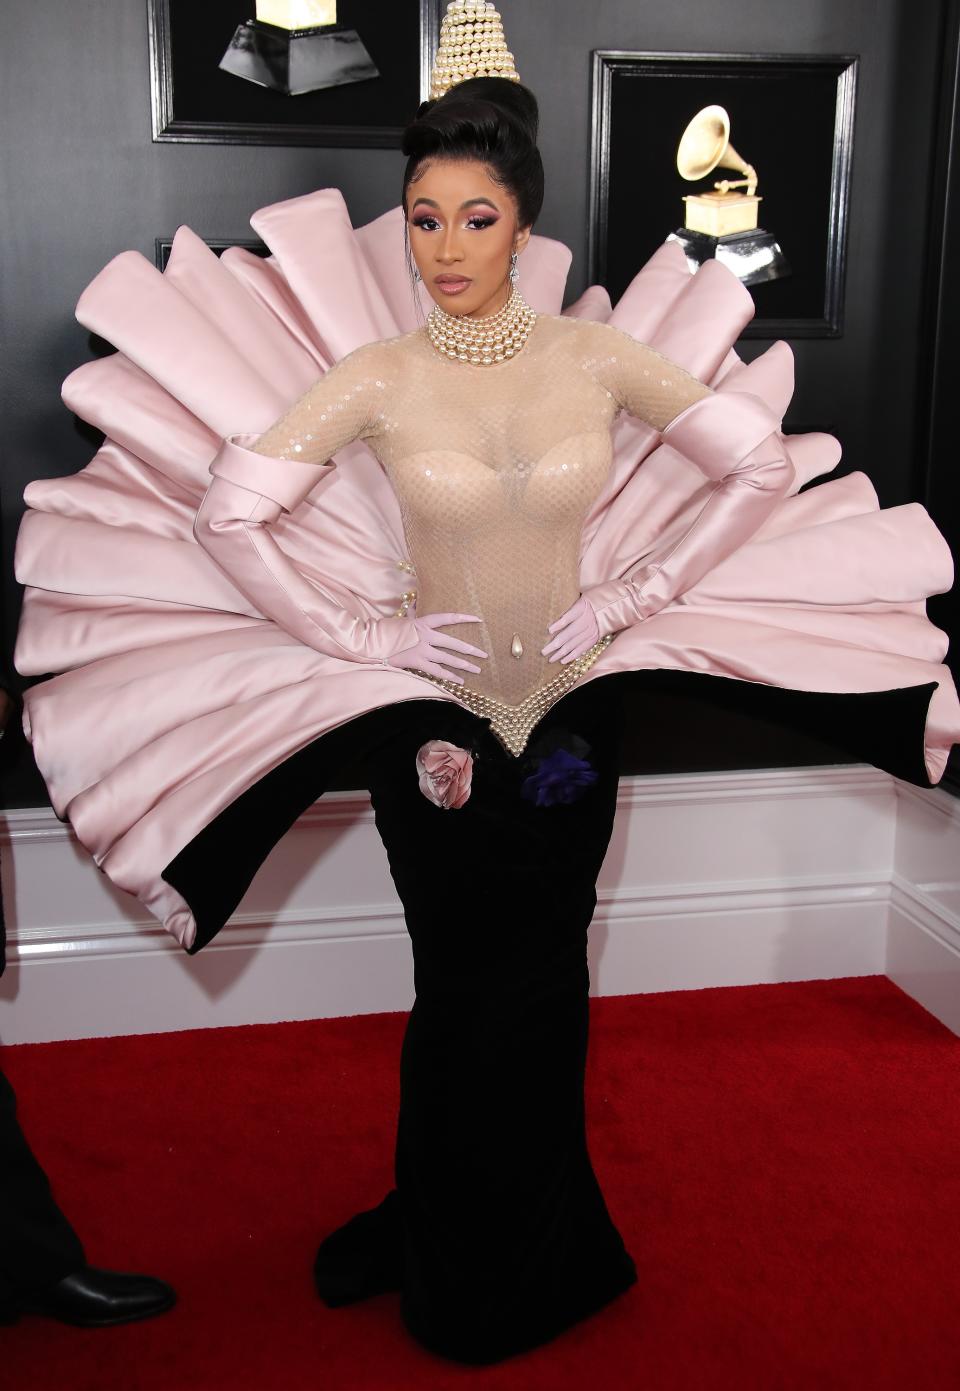 Cardi B's vintage Mugler clam-inspired gown looked too much like a costume for one of the biggest nights in music. (Image via Getty Images) 